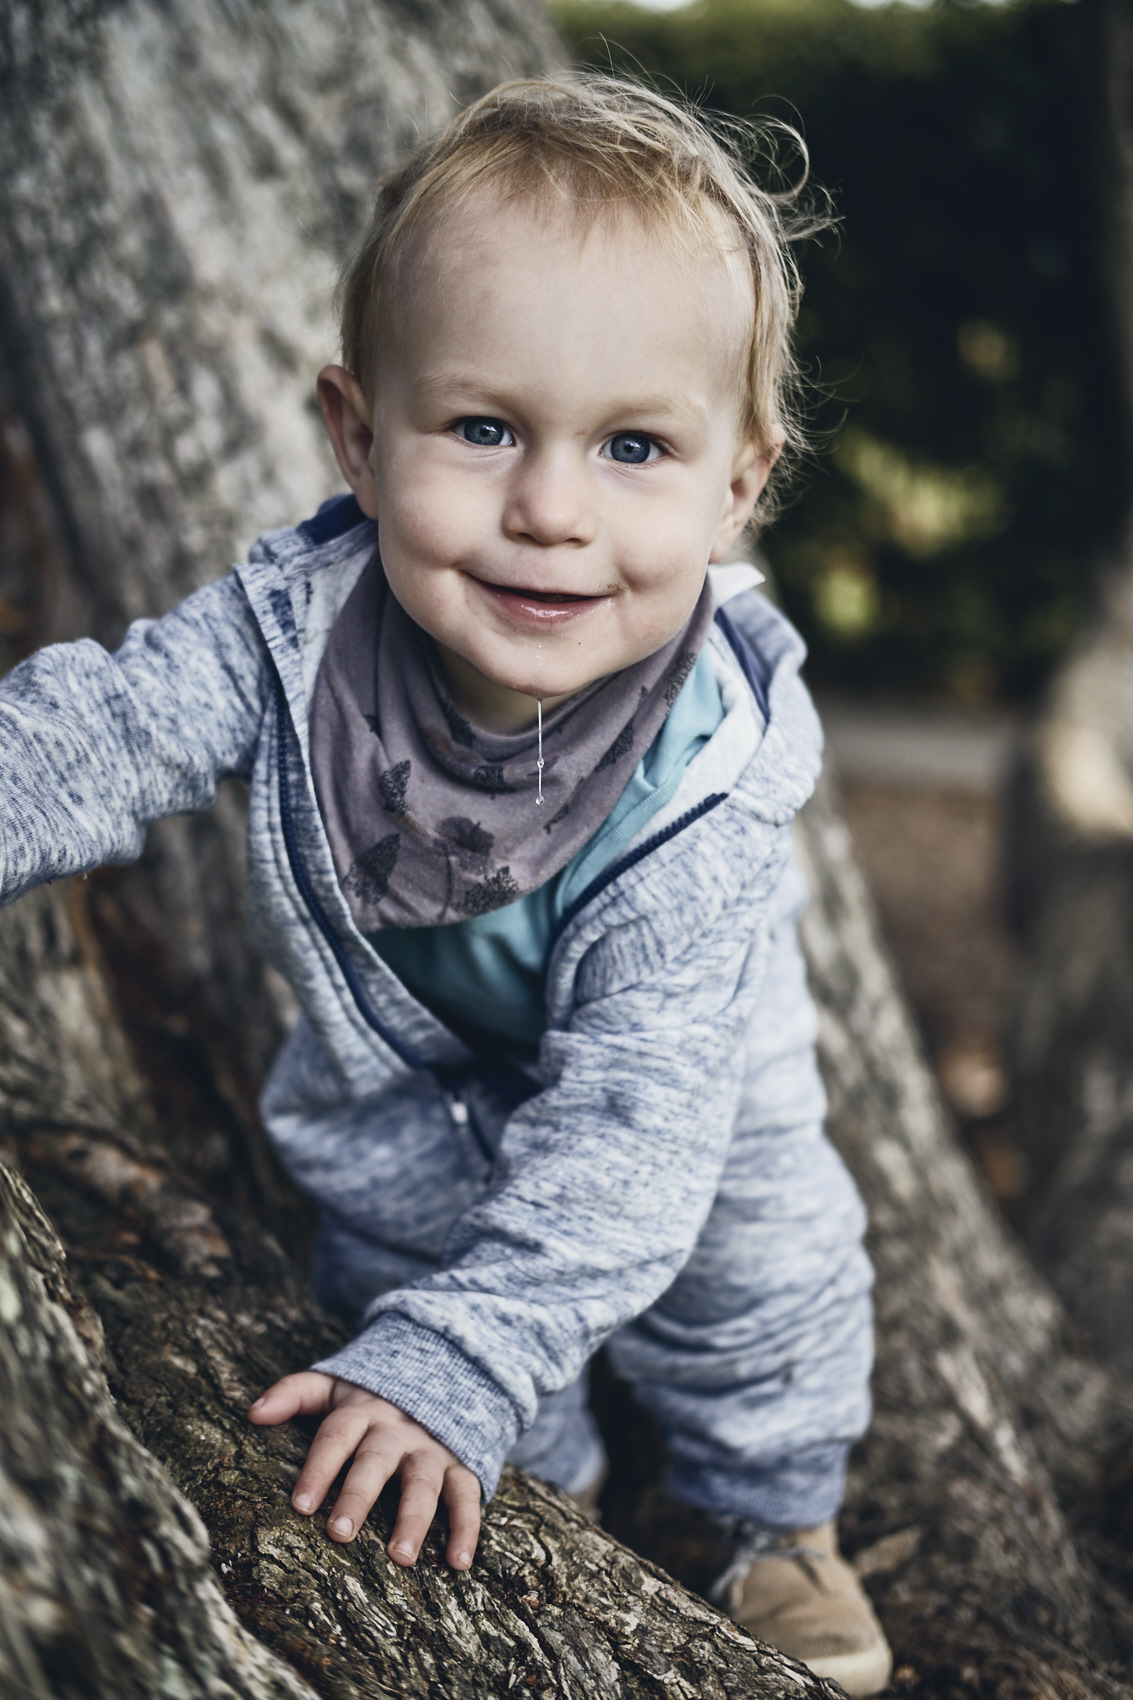 Lockdown • Toddler Climbing a Tree in Grey Tracksuit • Lifestyle & Portrait Photography